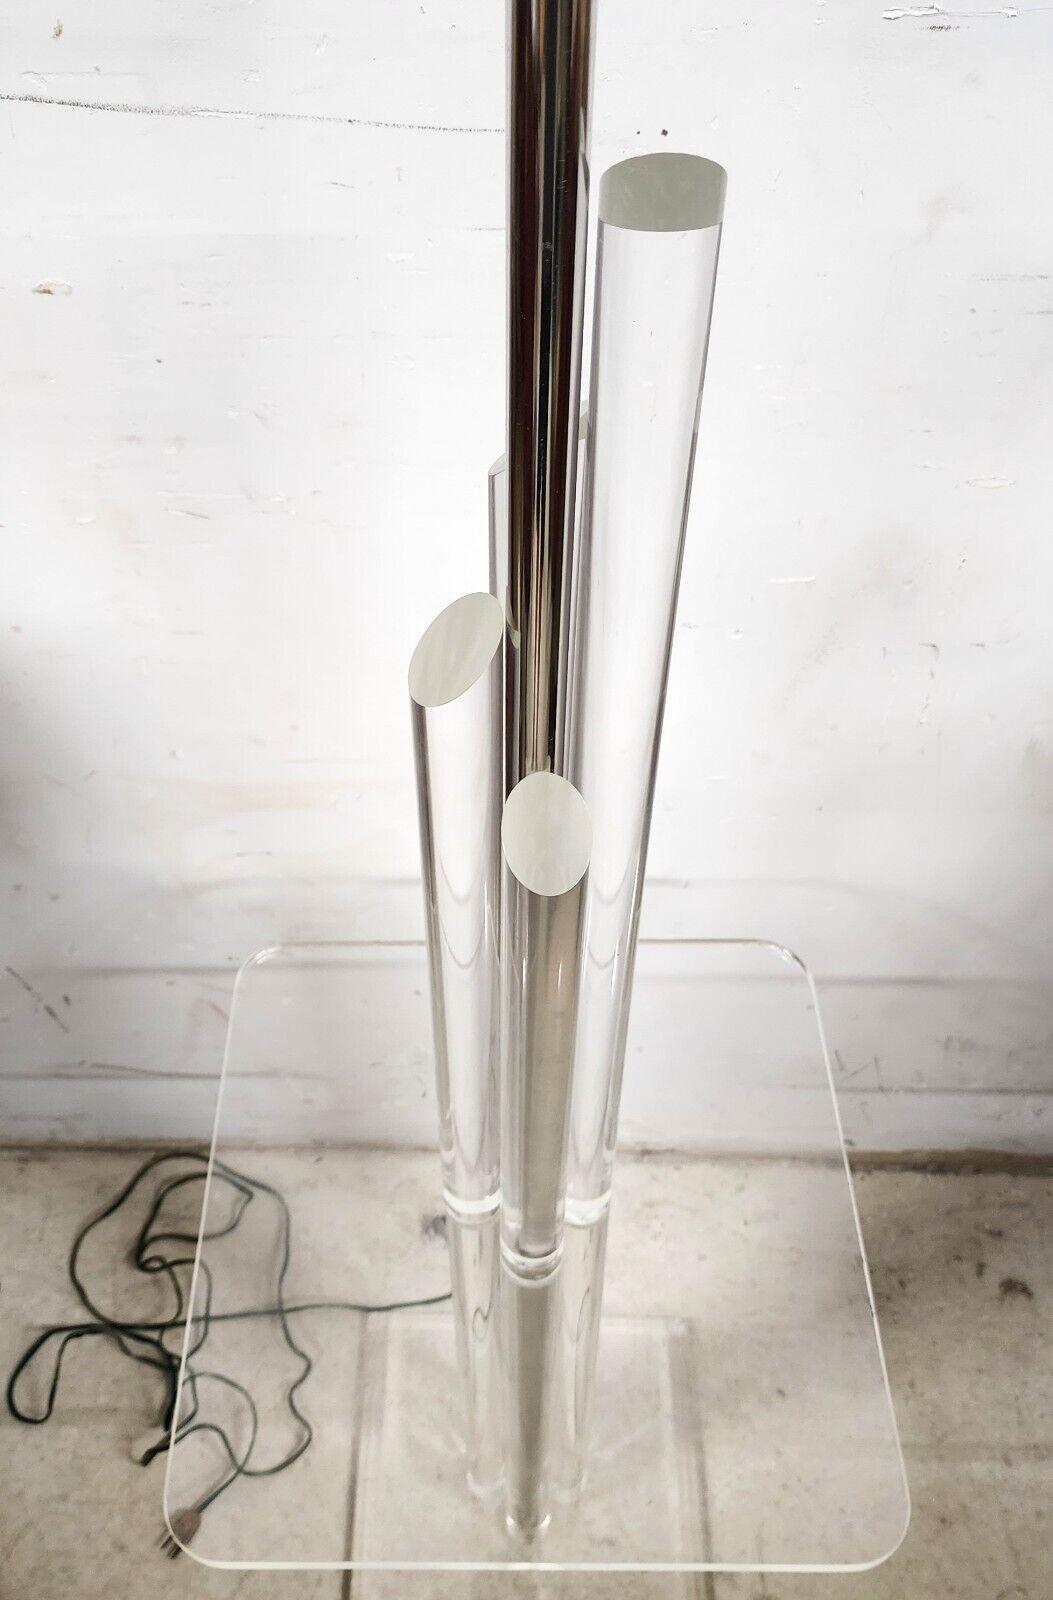 For FULL item description click on CONTINUE READING at the bottom of this page.

Offering One Of Our Recent Palm Beach Estate Fine Lighting Acquisitions Of A
Vintage 1980s Tubular Lucite Floor Lamp with Table 

Approximate Measurements in